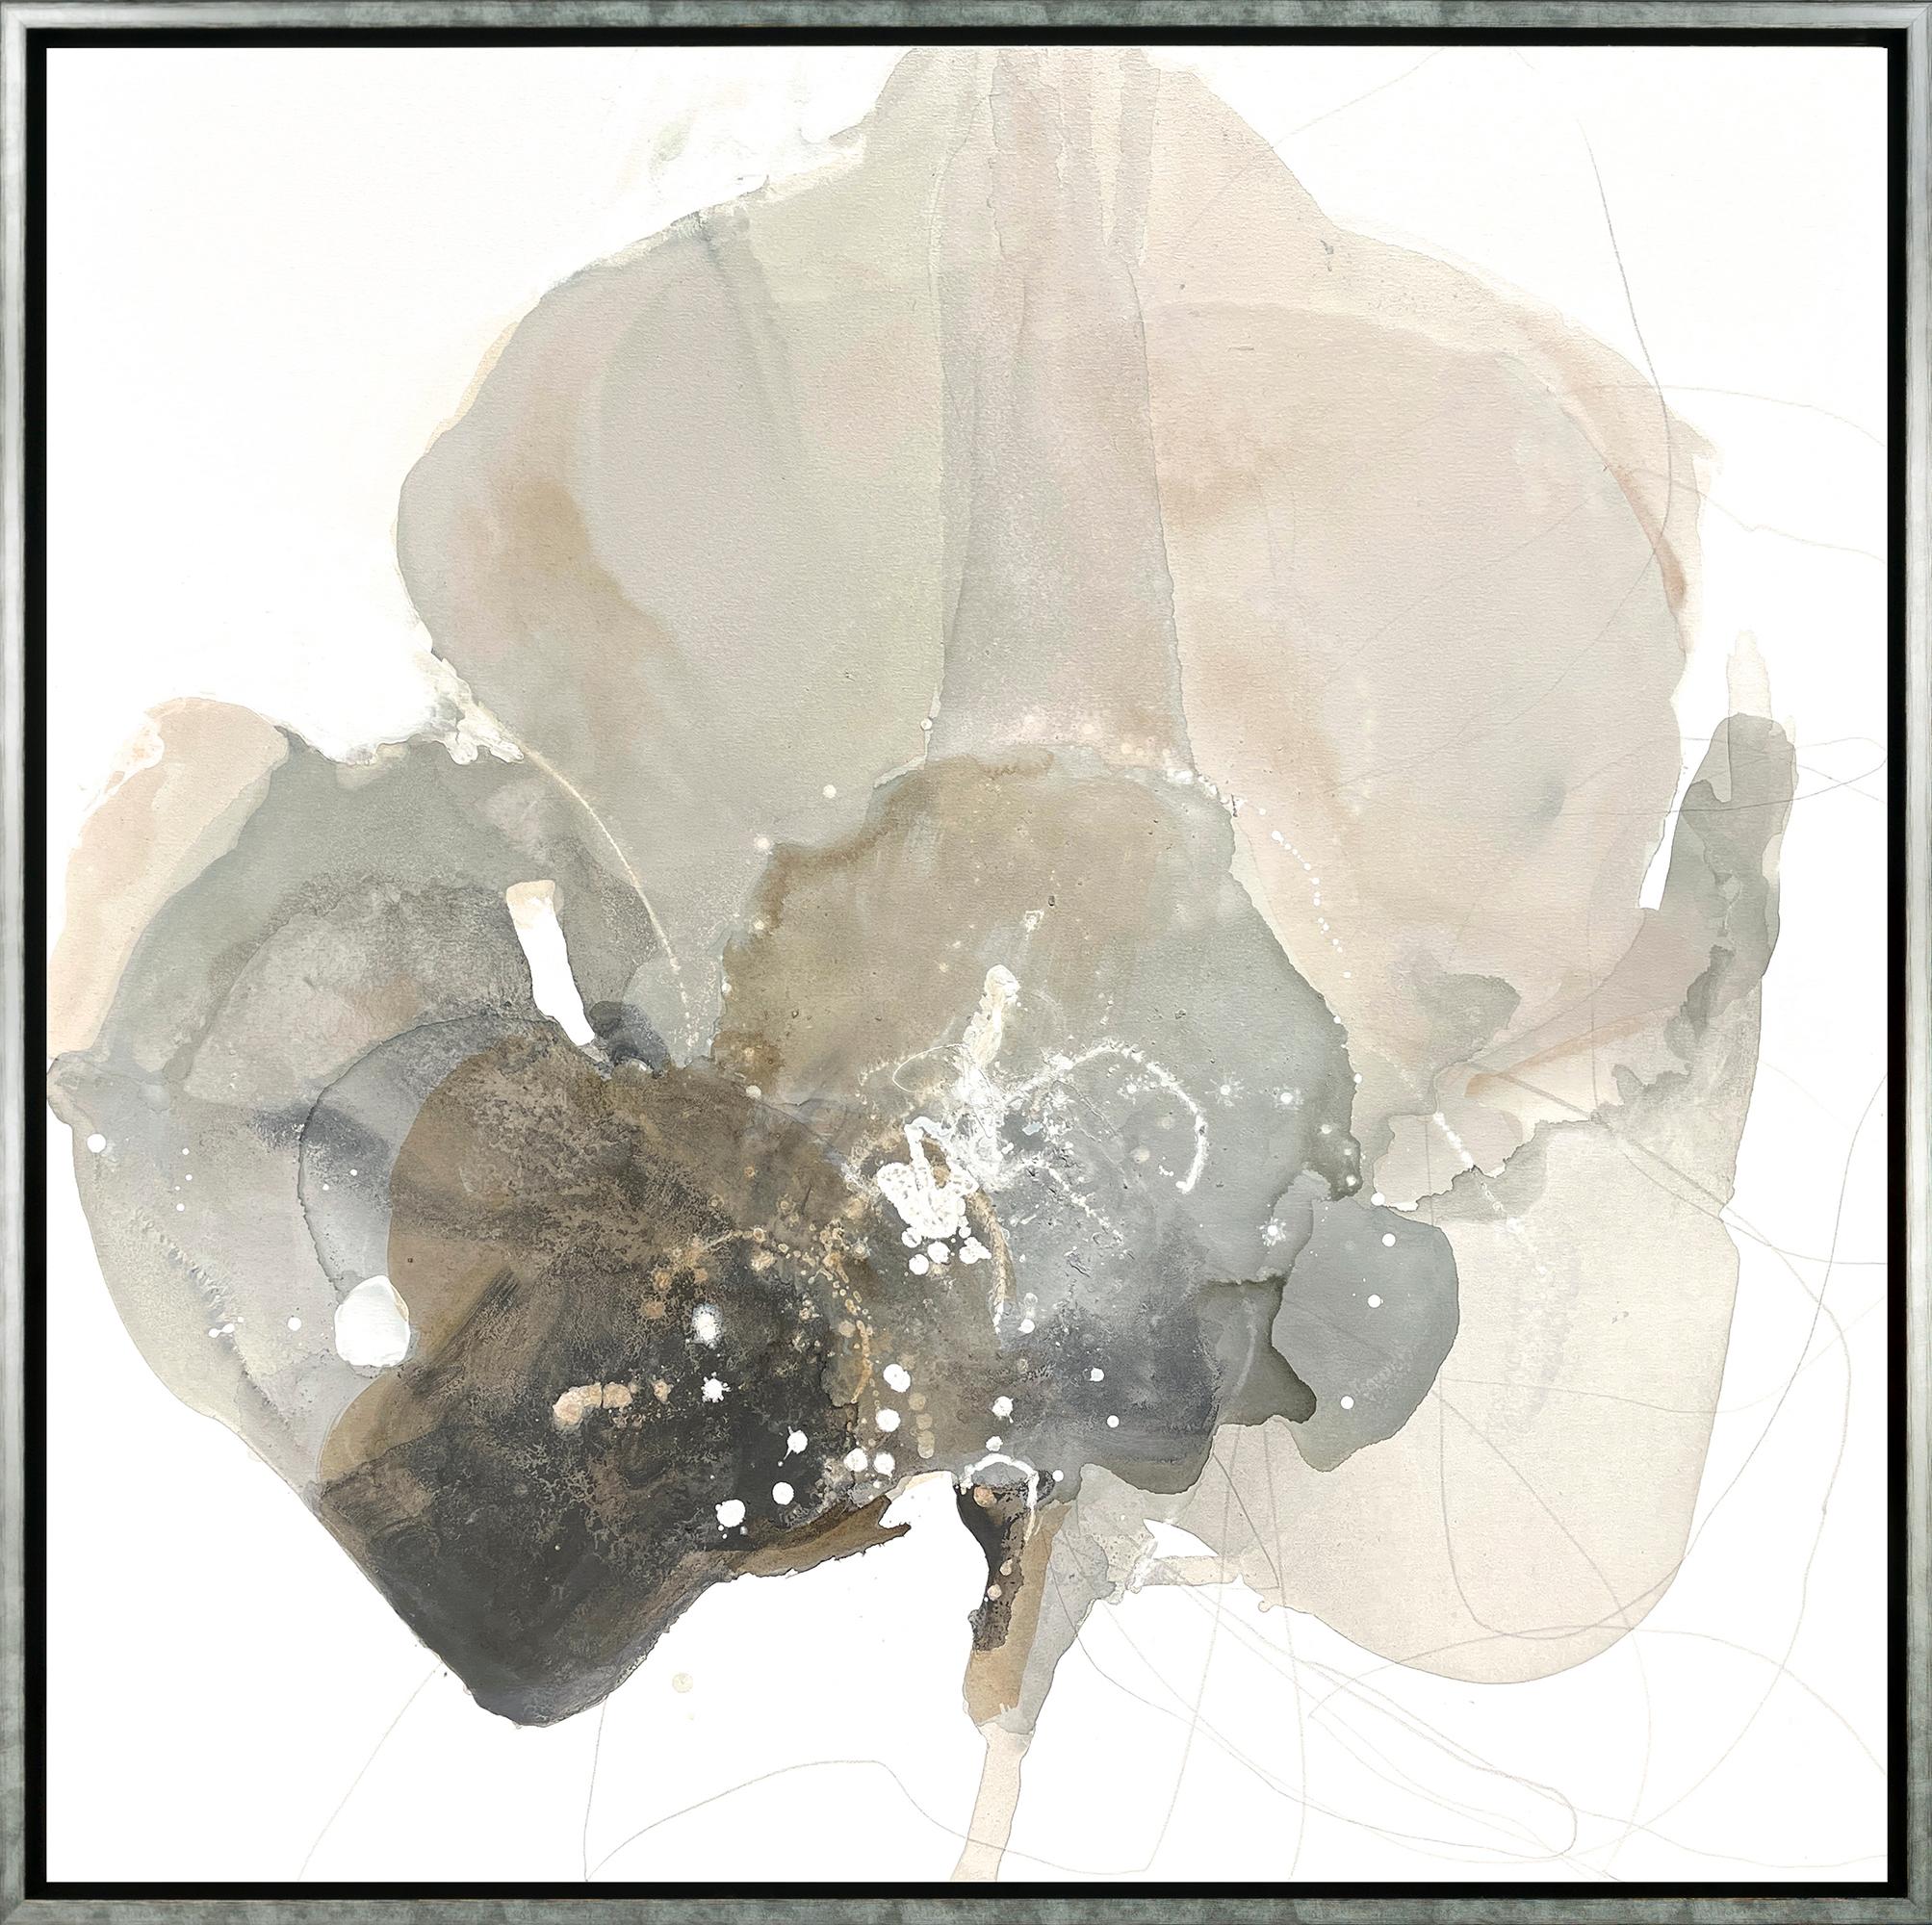 "Peony 7" is a framed mixed media work on canvas by Liz Barber, depicting an abstracted, asymmetrical flower in soft creams and grays. The organic lines and shapes emulate playful, frenetic movement, balanced by the quietude of the color